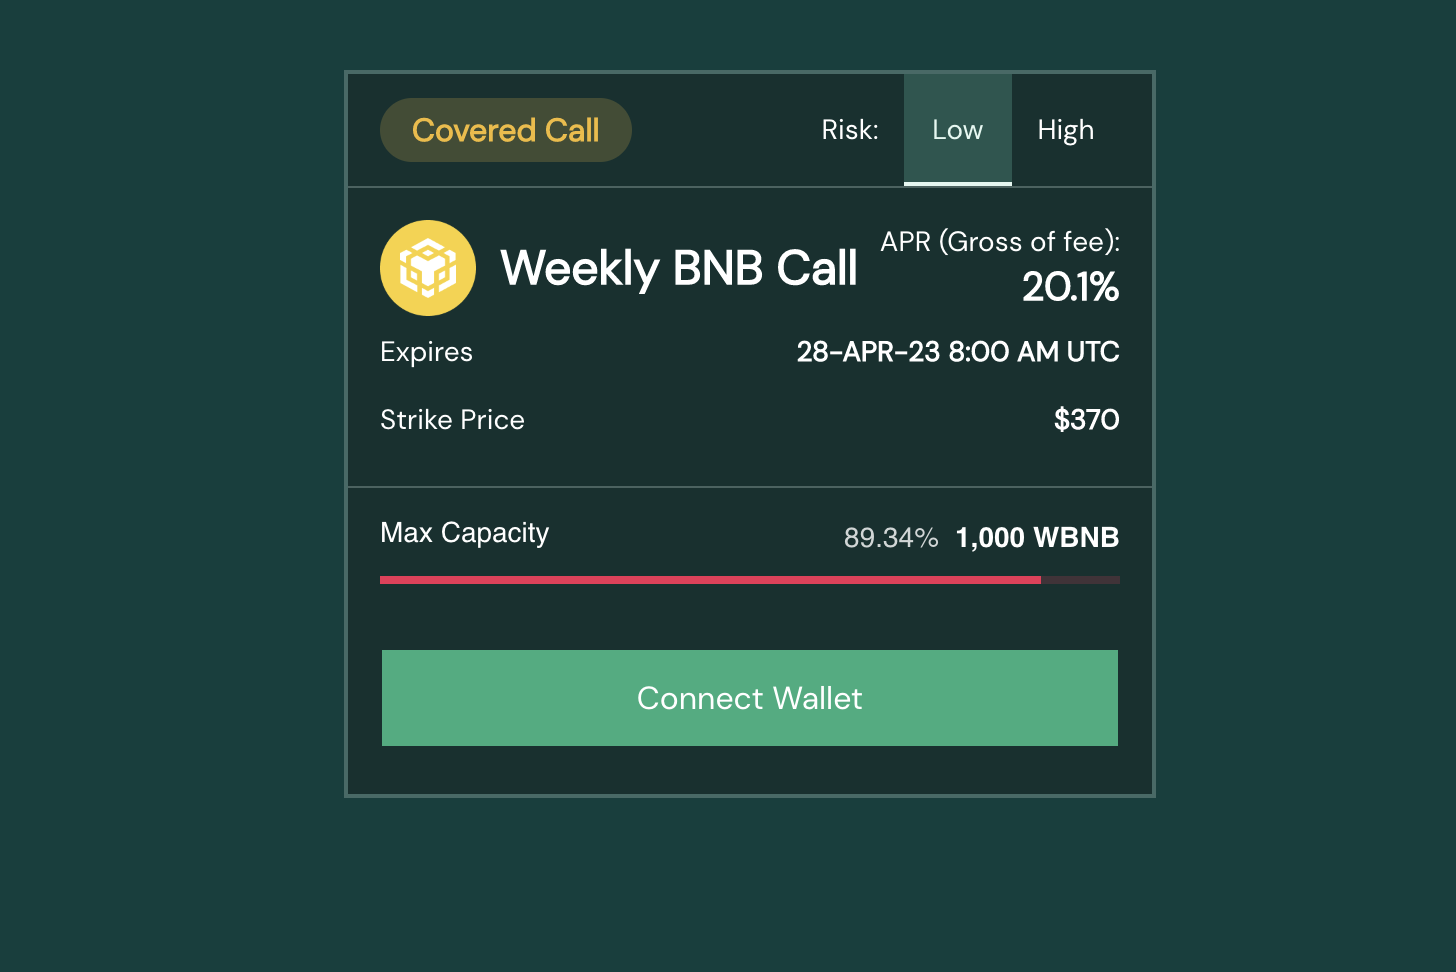 Weekly BNB Covered Call